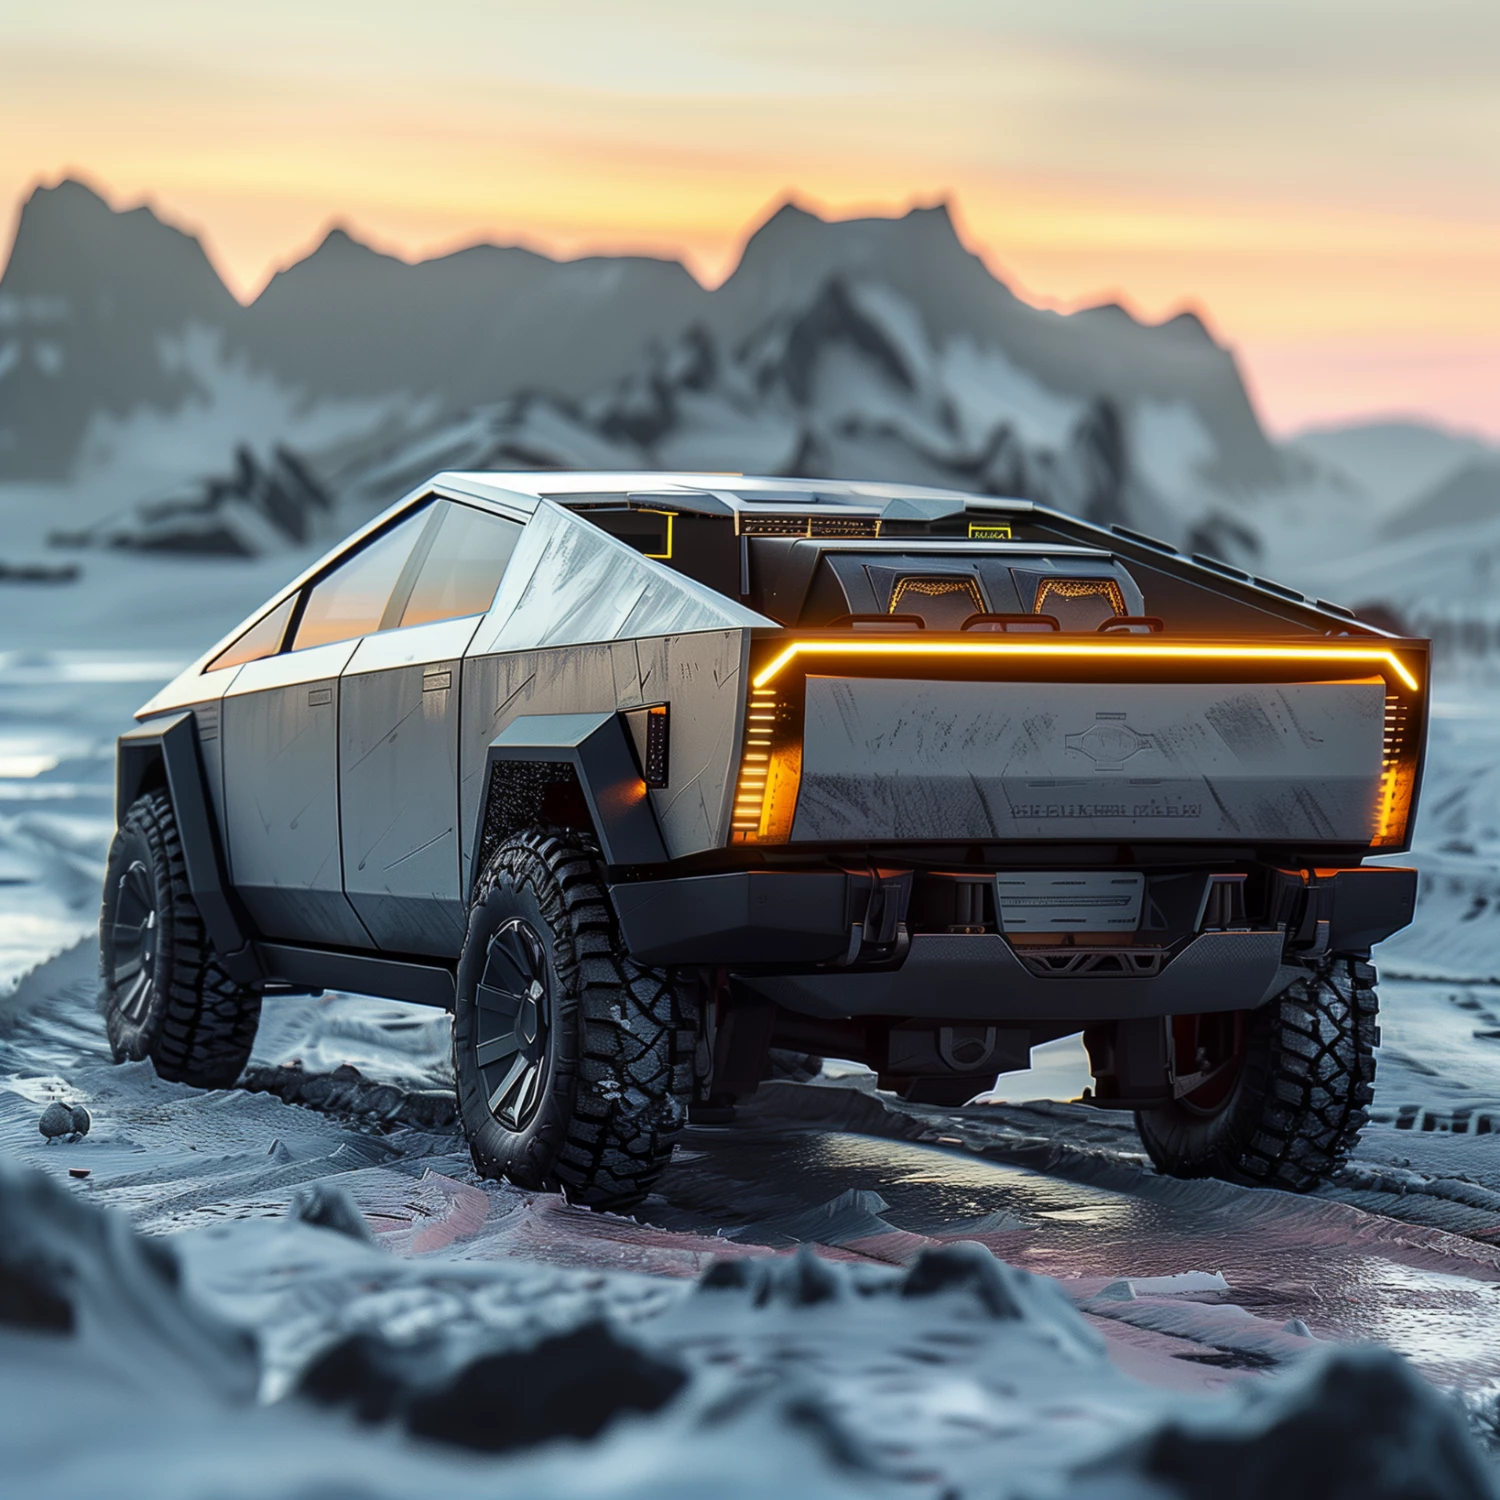 17 Pickup Trucks So Futuristic You Won't Believe They're Real